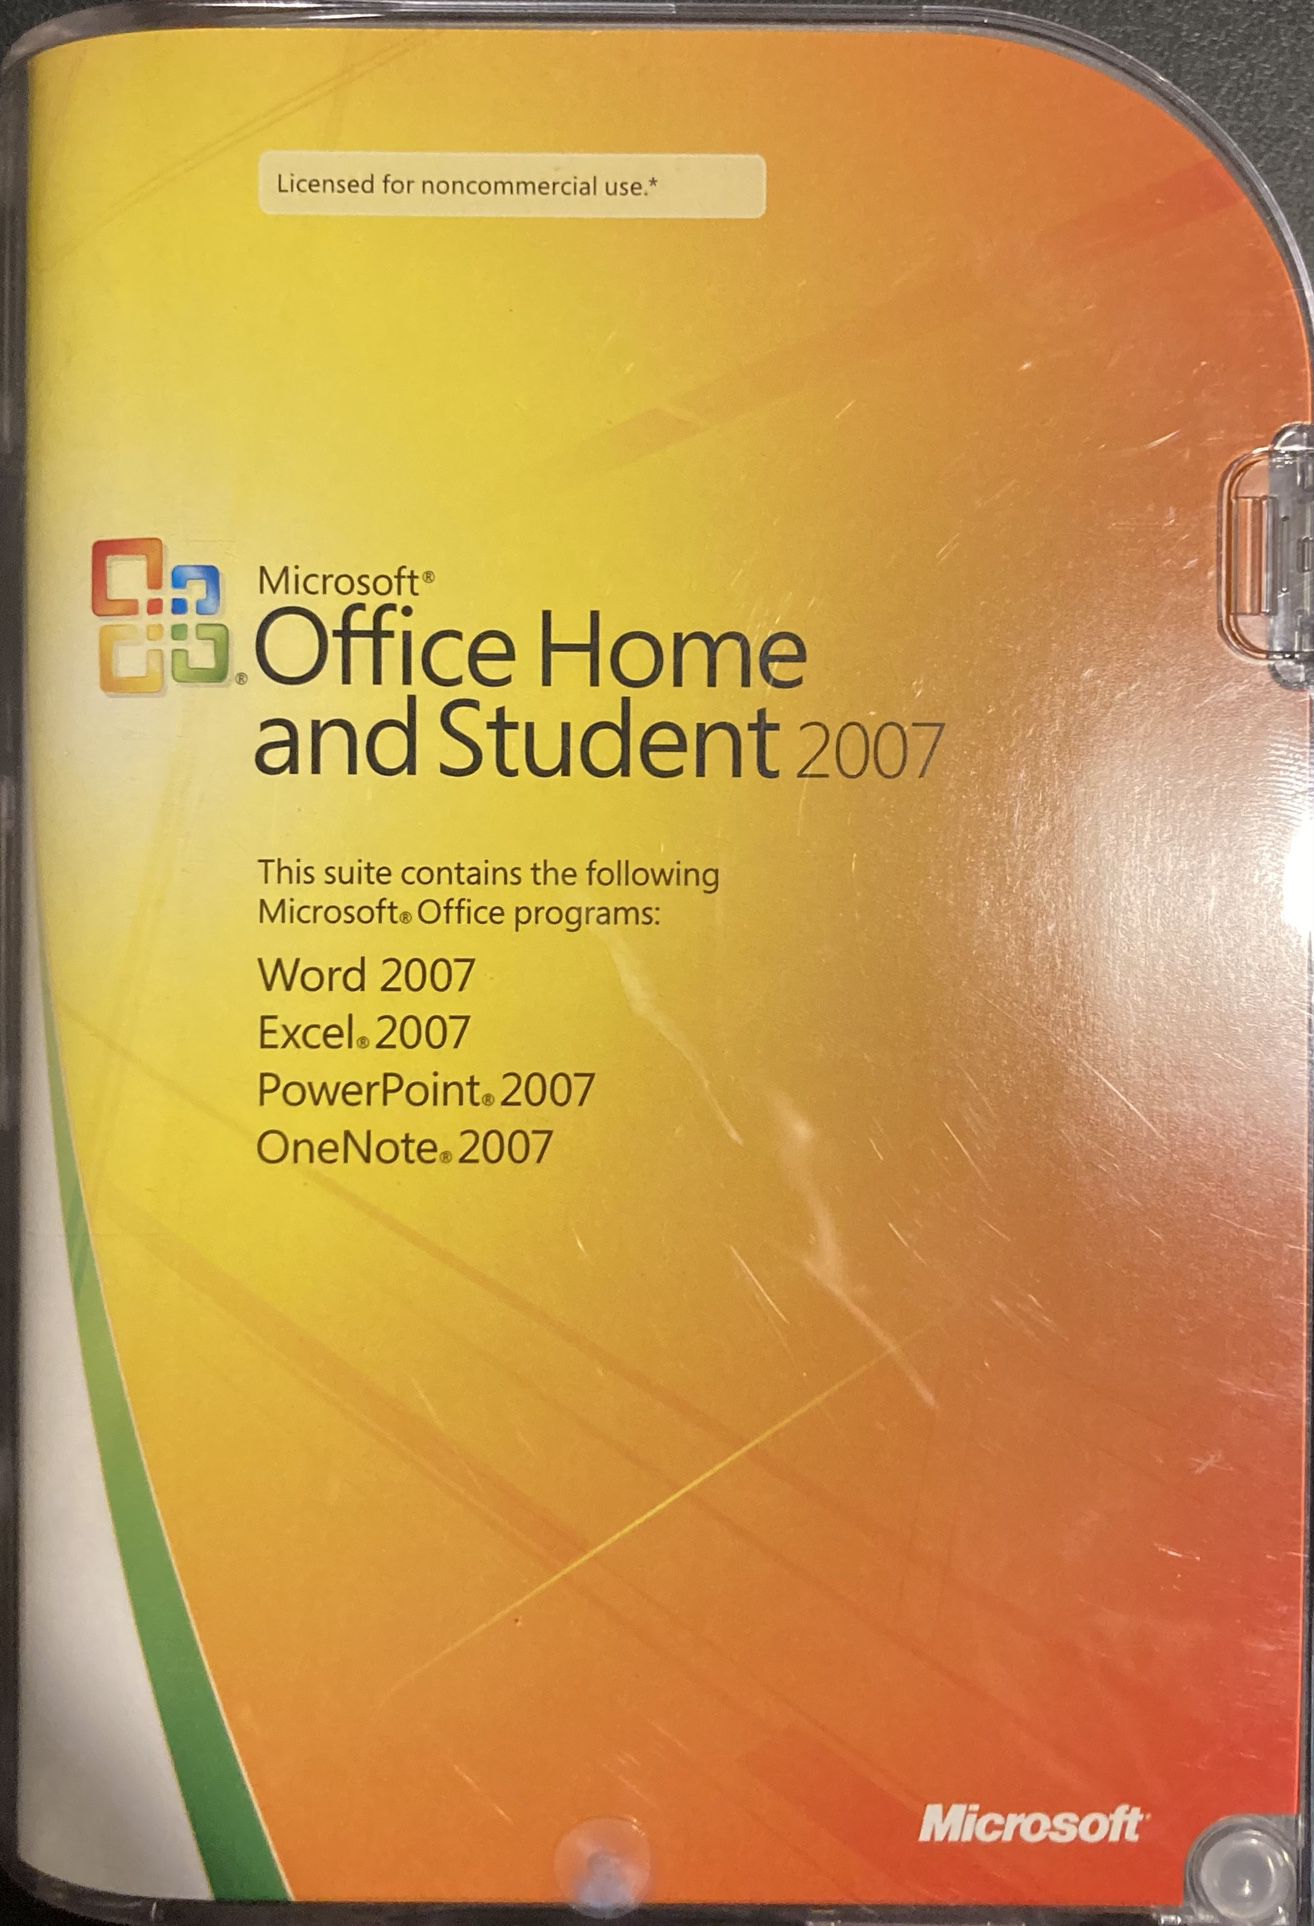 Microsoft Office Home and Student (2007)